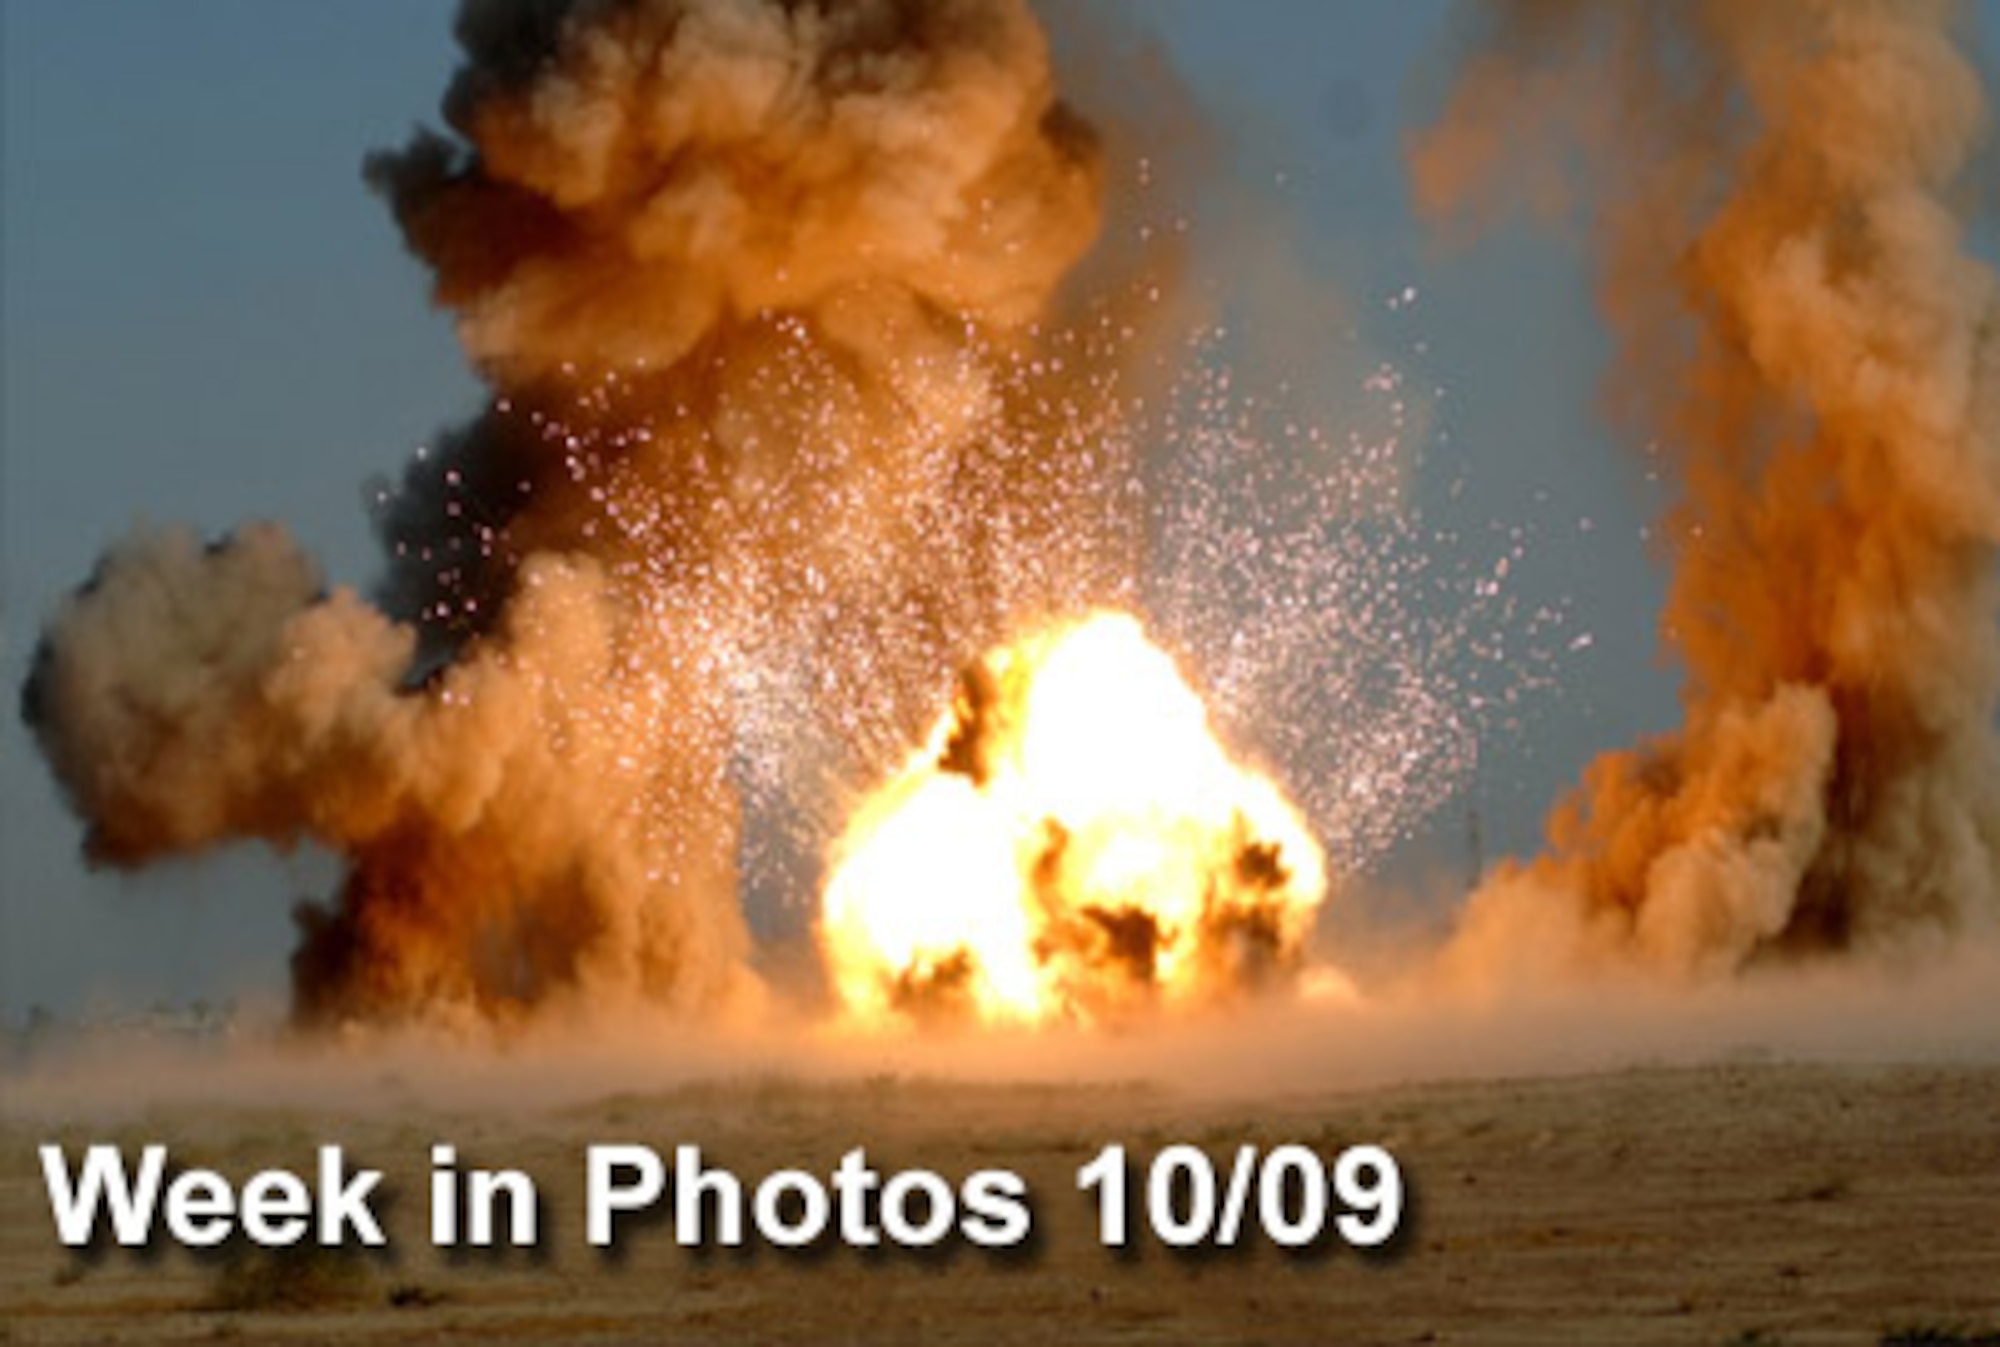 Air Force Week in Photos for Oct. 9 highlights photos from around the Air Force. In this photo by Senior Airman Christopher Hubenthal, explosive ordnance disposal technicians from the 332nd Expeditionary Civil Engineer Squadron conduct a controlled detonation Sept. 30, 2009, at Joint Base Balad, Iraq. (U.S. Air Force illustration)